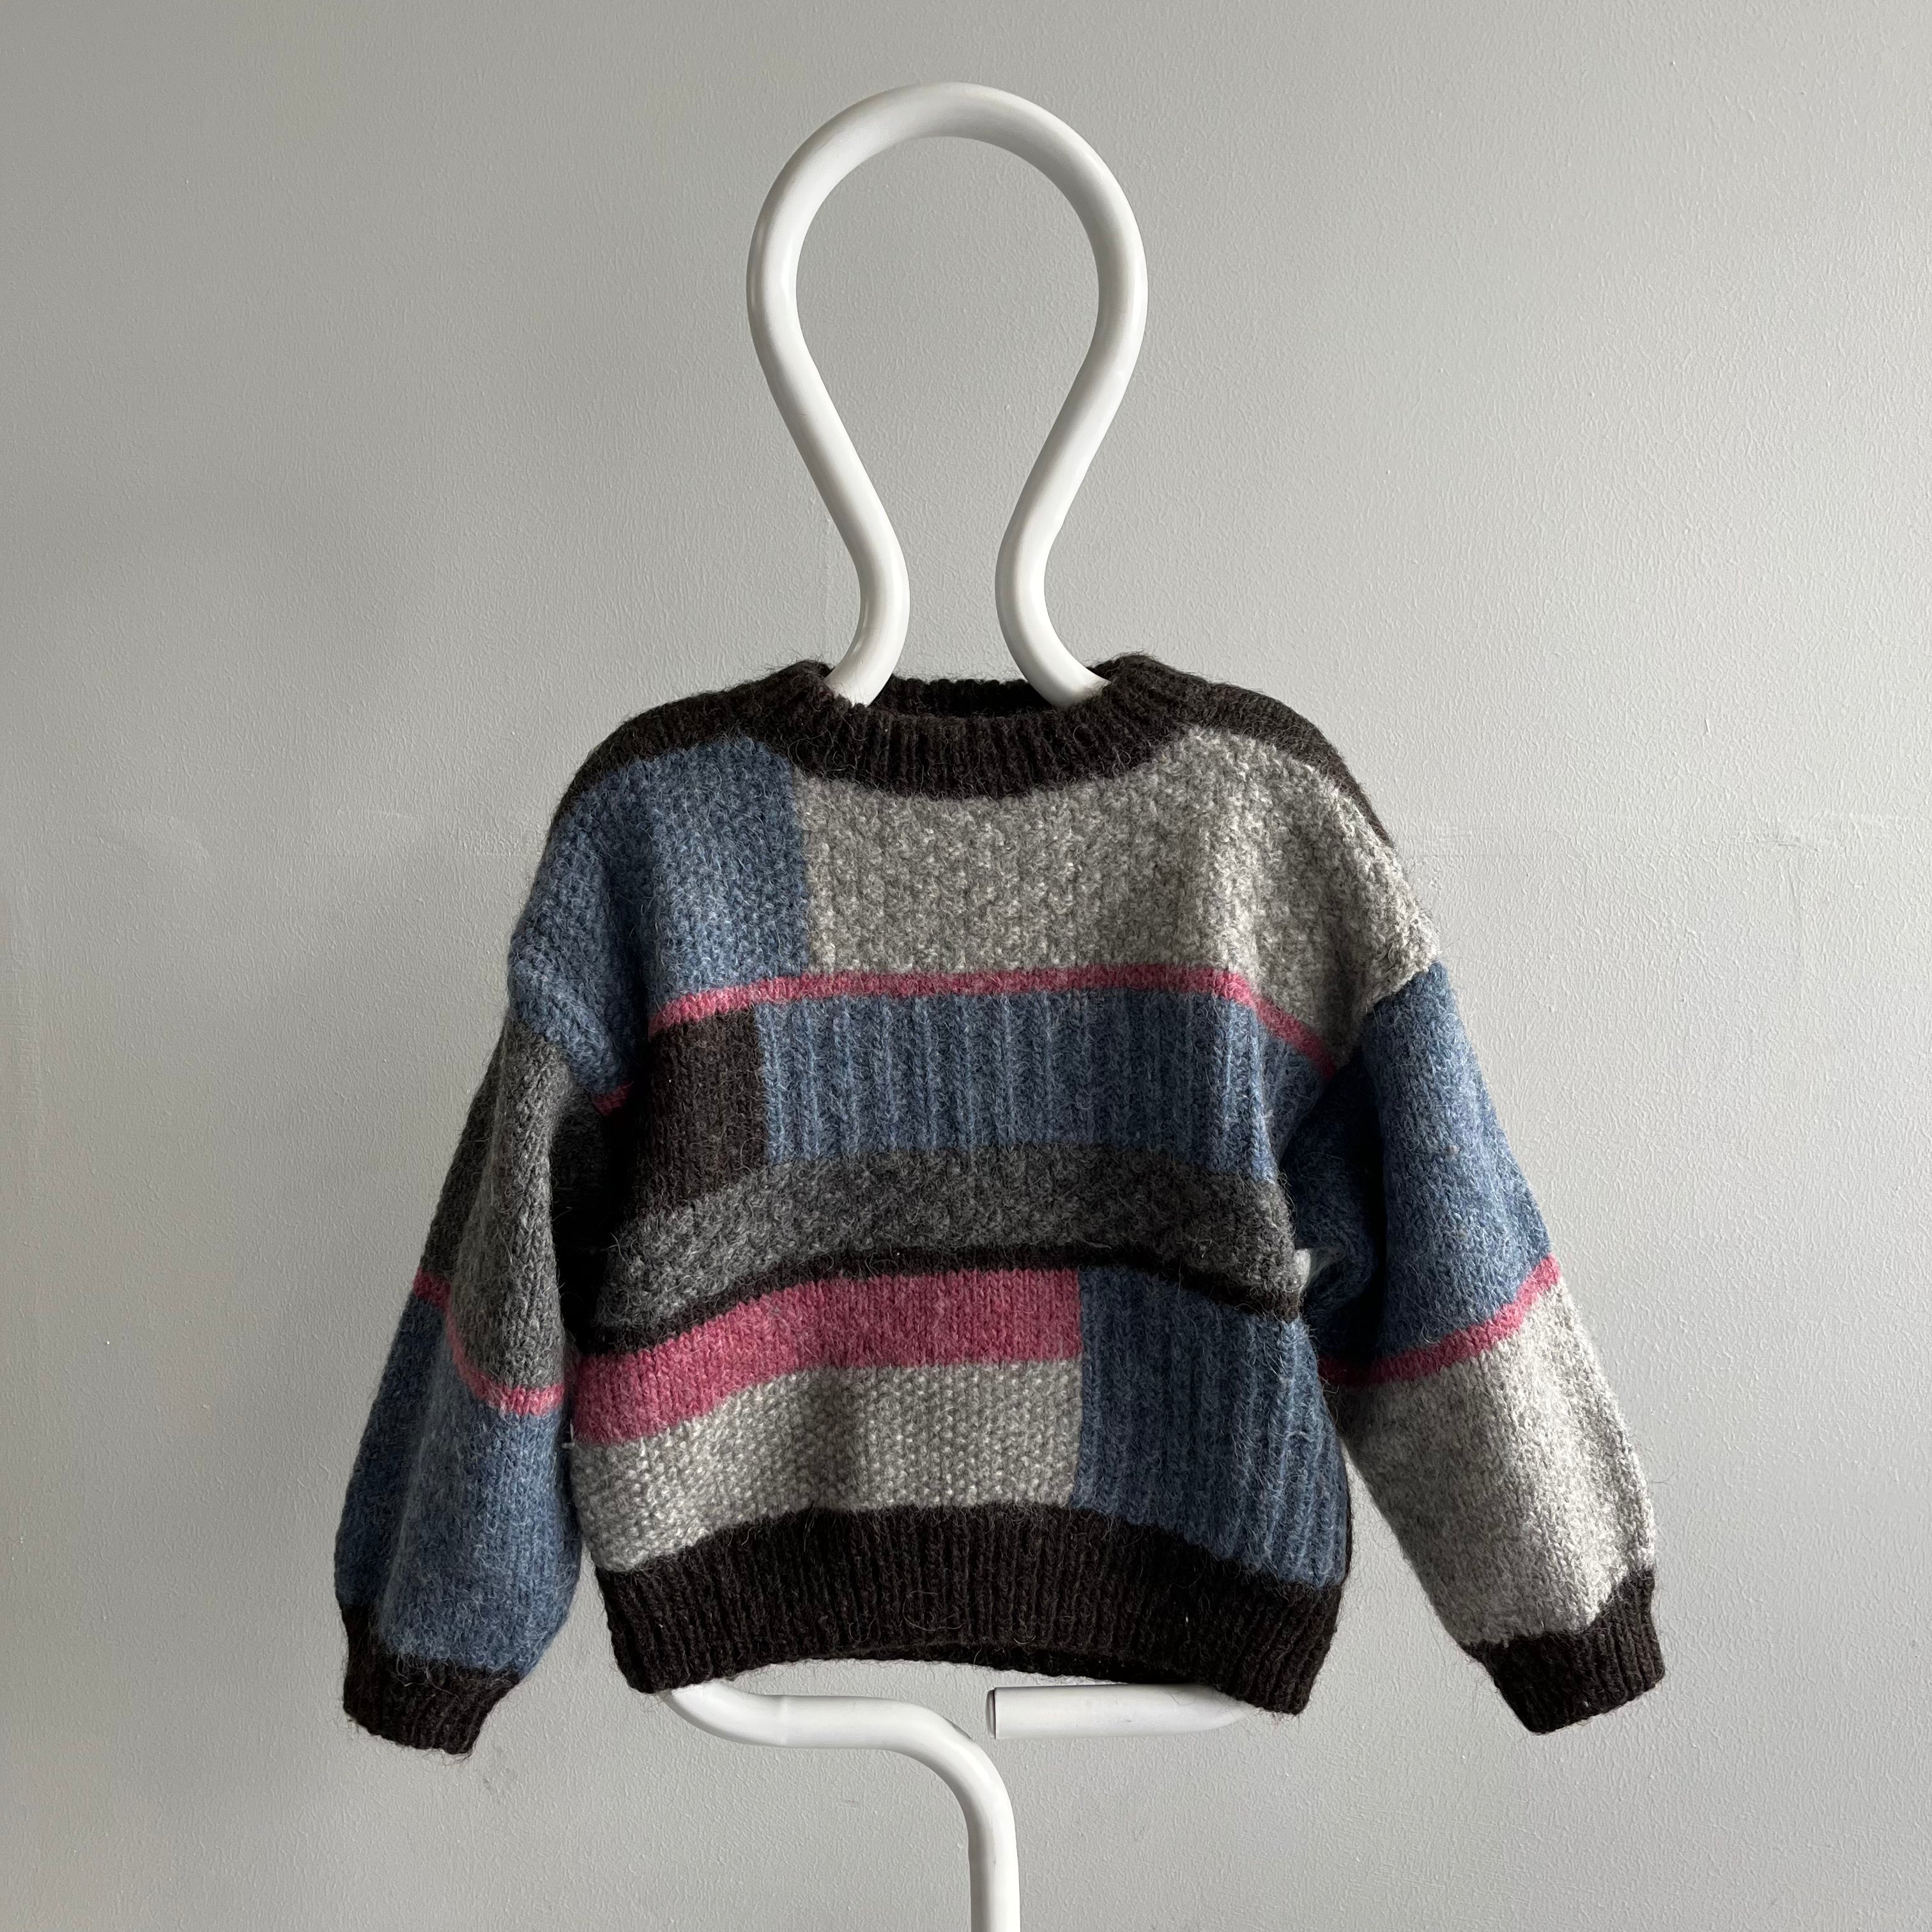 1980s Home? Knit Bell Sleeve Color Block Sweater - WOW